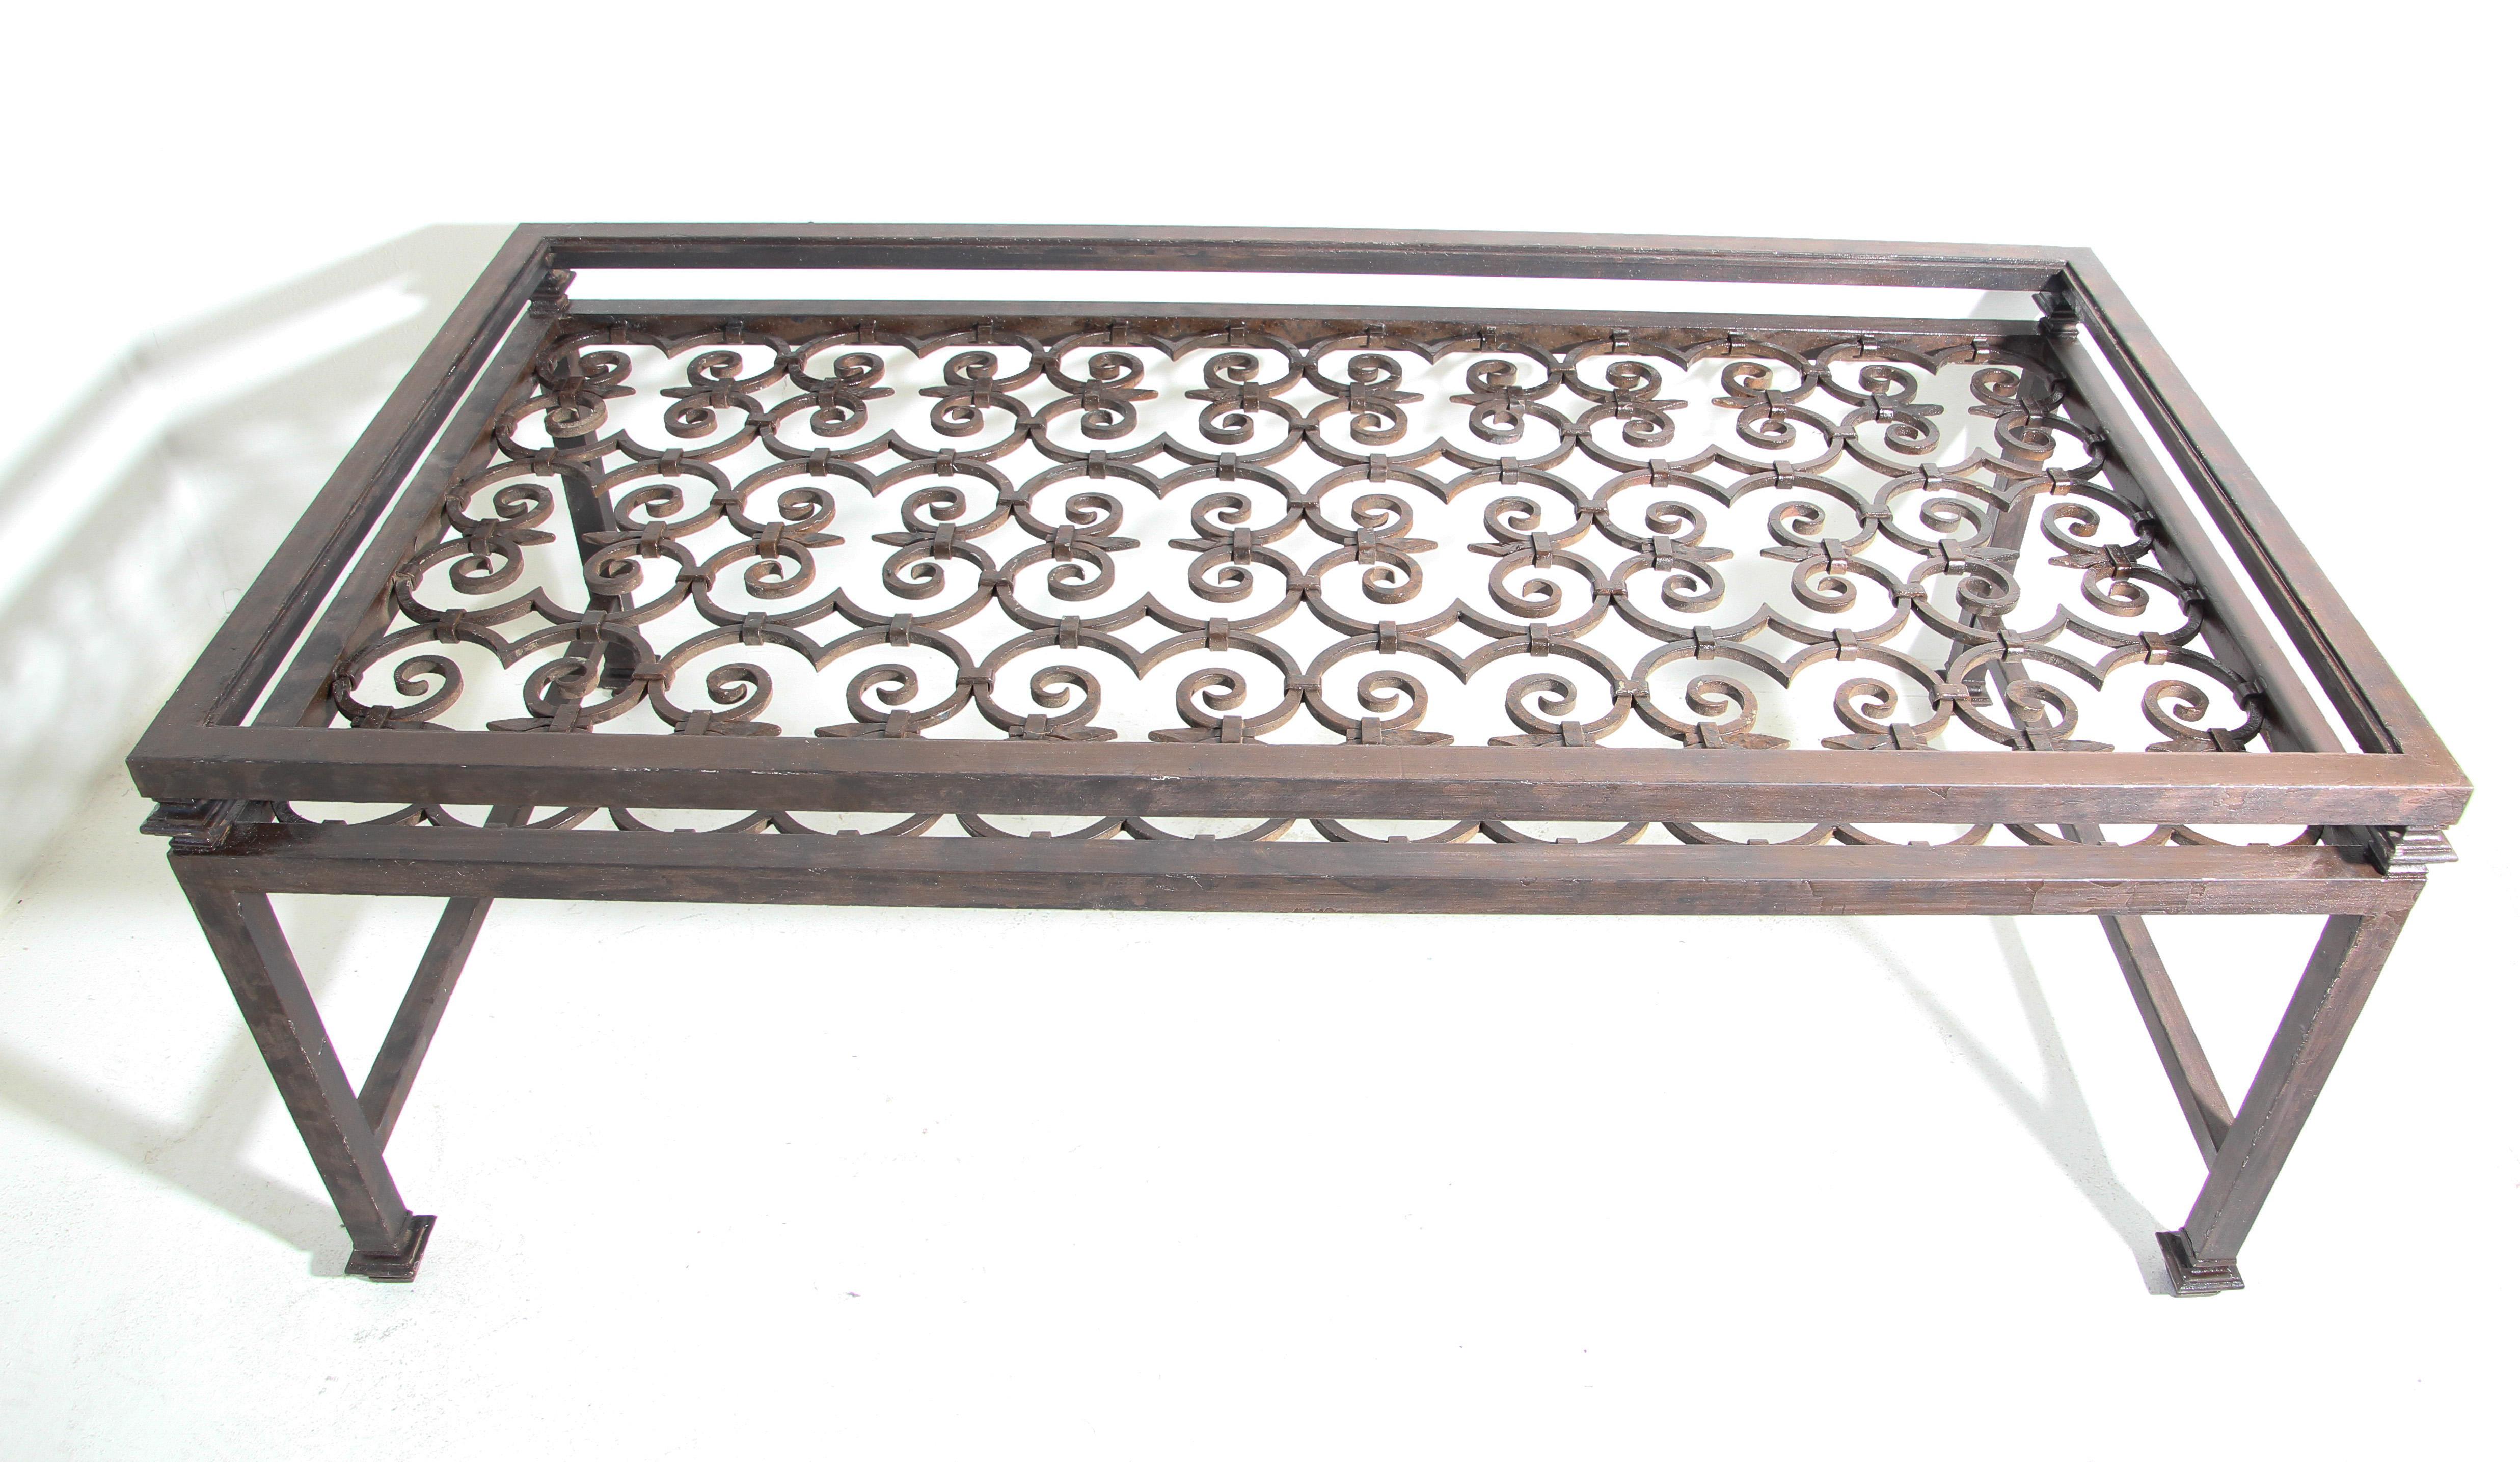 Impressive large Spanish Revival wrought Iron coffee table base with the typical Moorish design construction.
Made from an antique reclaimed window screen into a coffee table.
Stunning Moorish Spanish revival iron coffee table base only, no glass